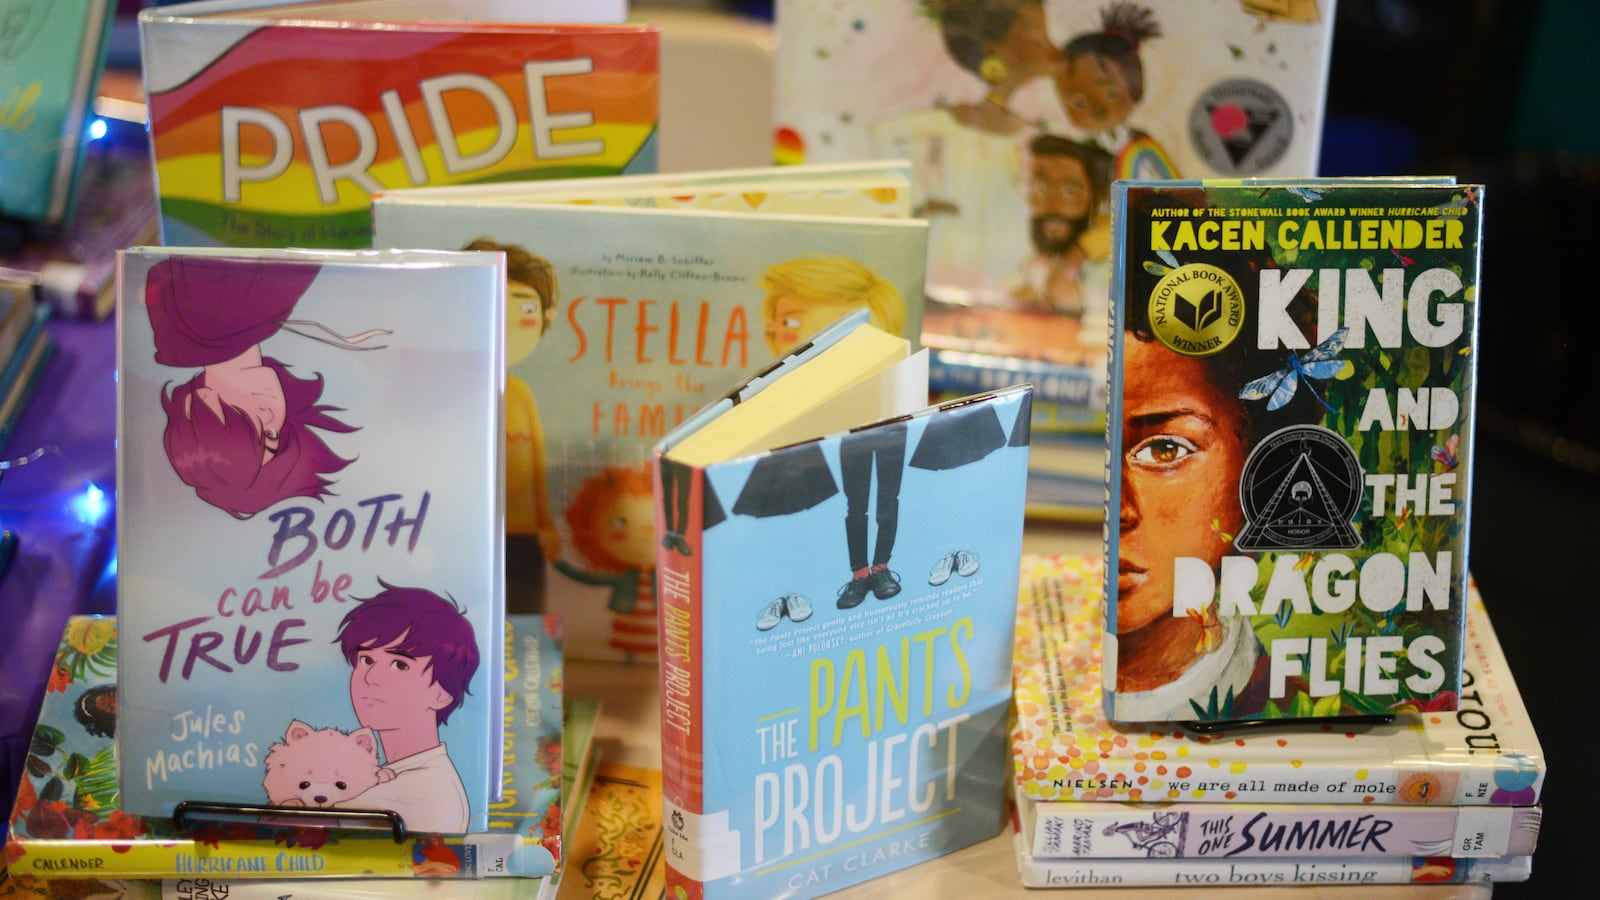 Children’s books about LGBTQ+ issues sit on a shelf.